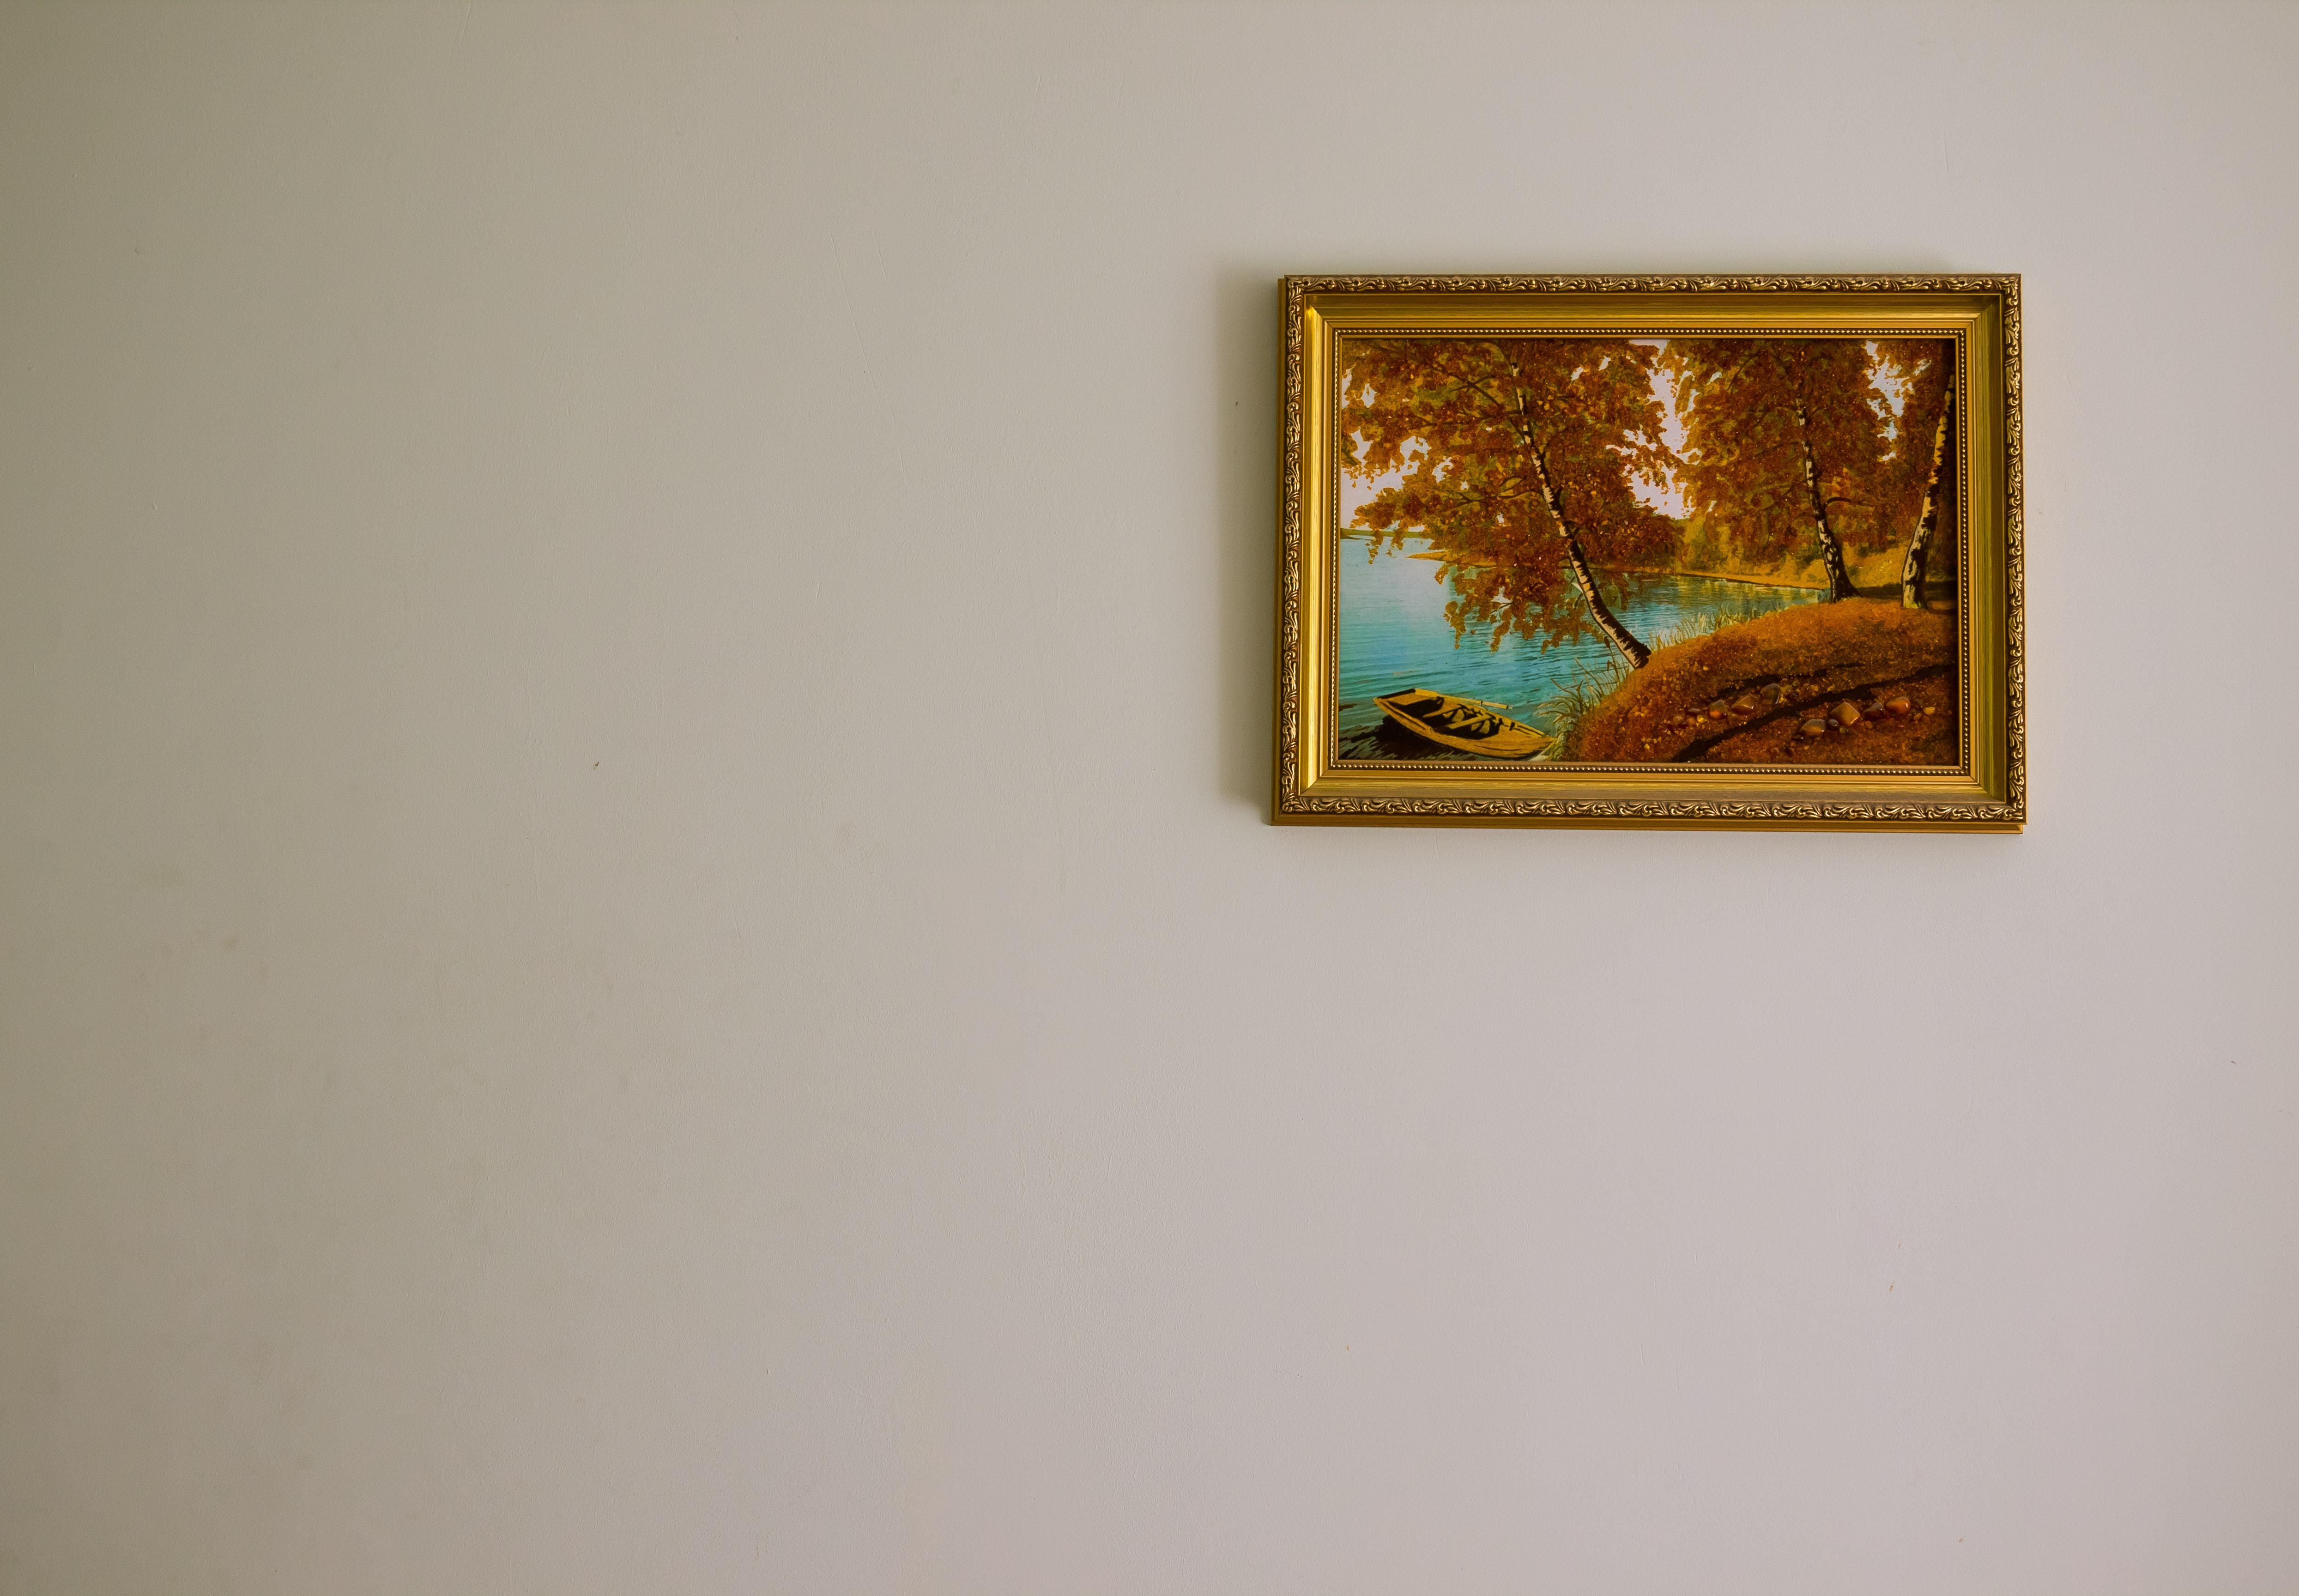 Photo by Romka: https://www.pexels.com/photo/a-single-gold-framed-painting-on-the-wall-2951525/